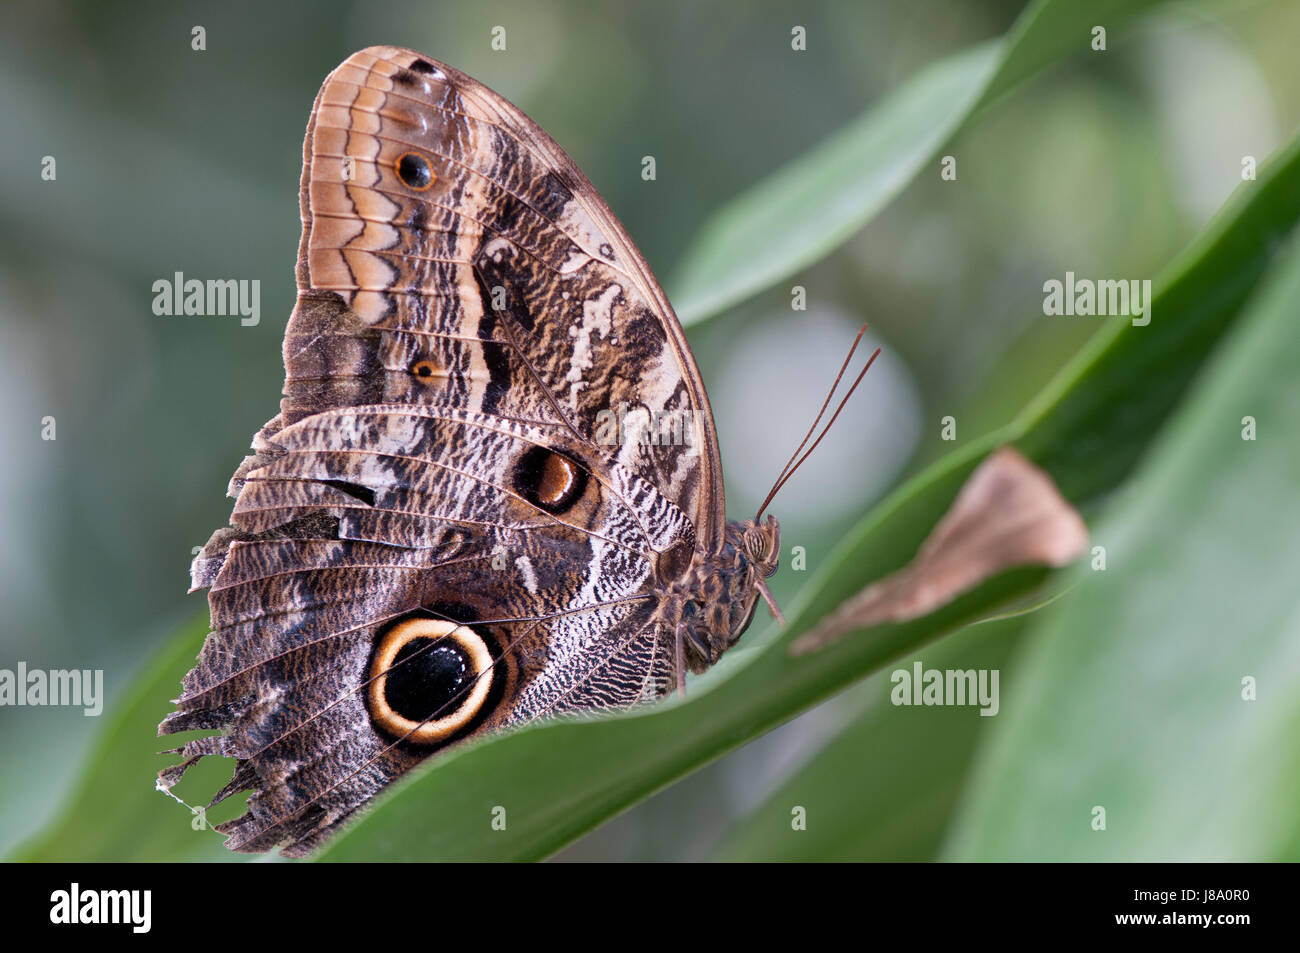 brown, brownish, brunette, butterfly, eye, organ, eyes, animal, insect, Stock Photo